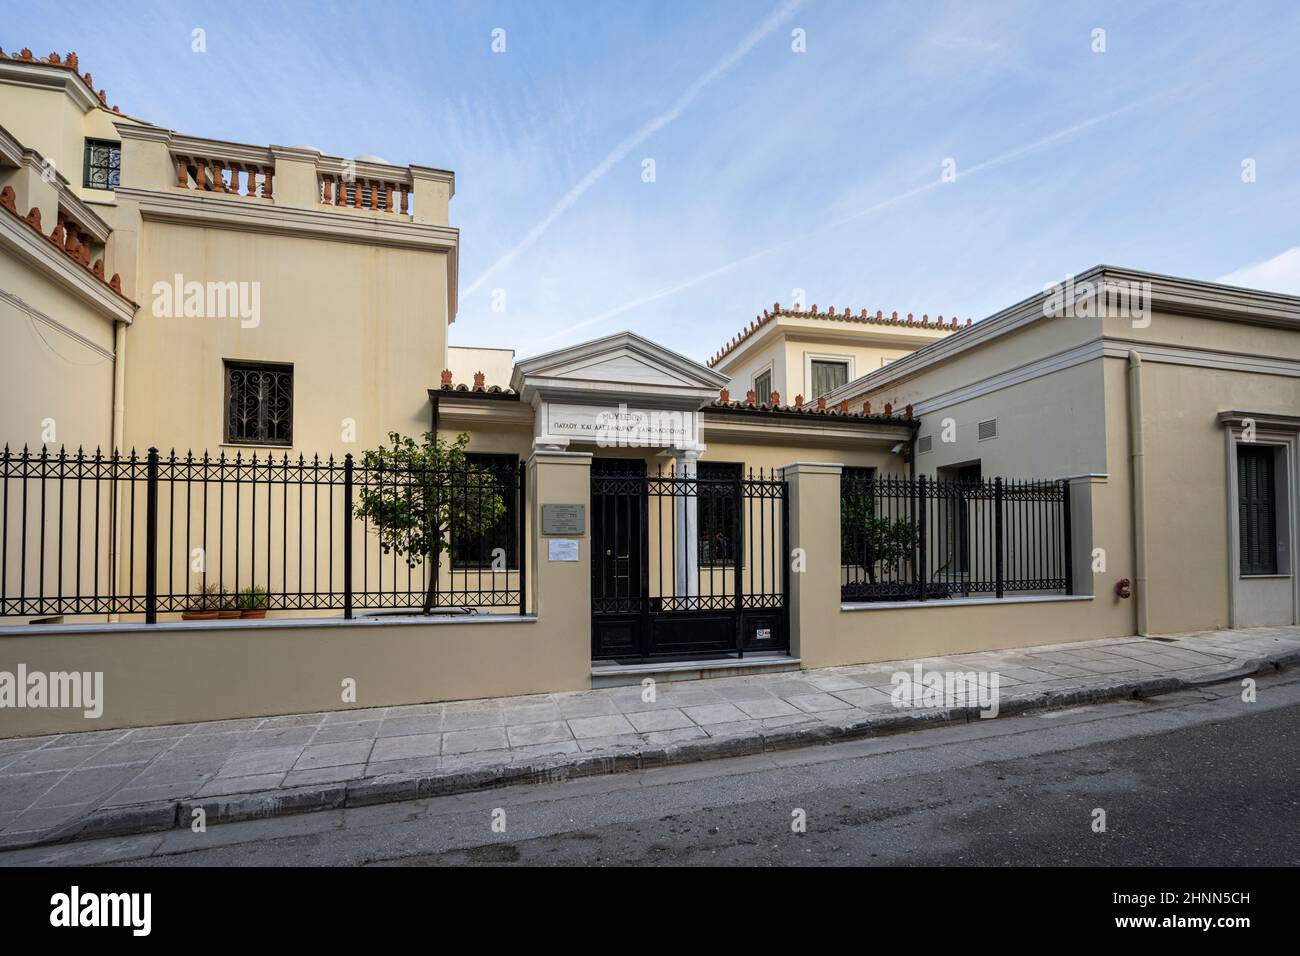 Das Paul and Alexandra Canellopoulos Museum in Athen, Griechenland. Stockfoto